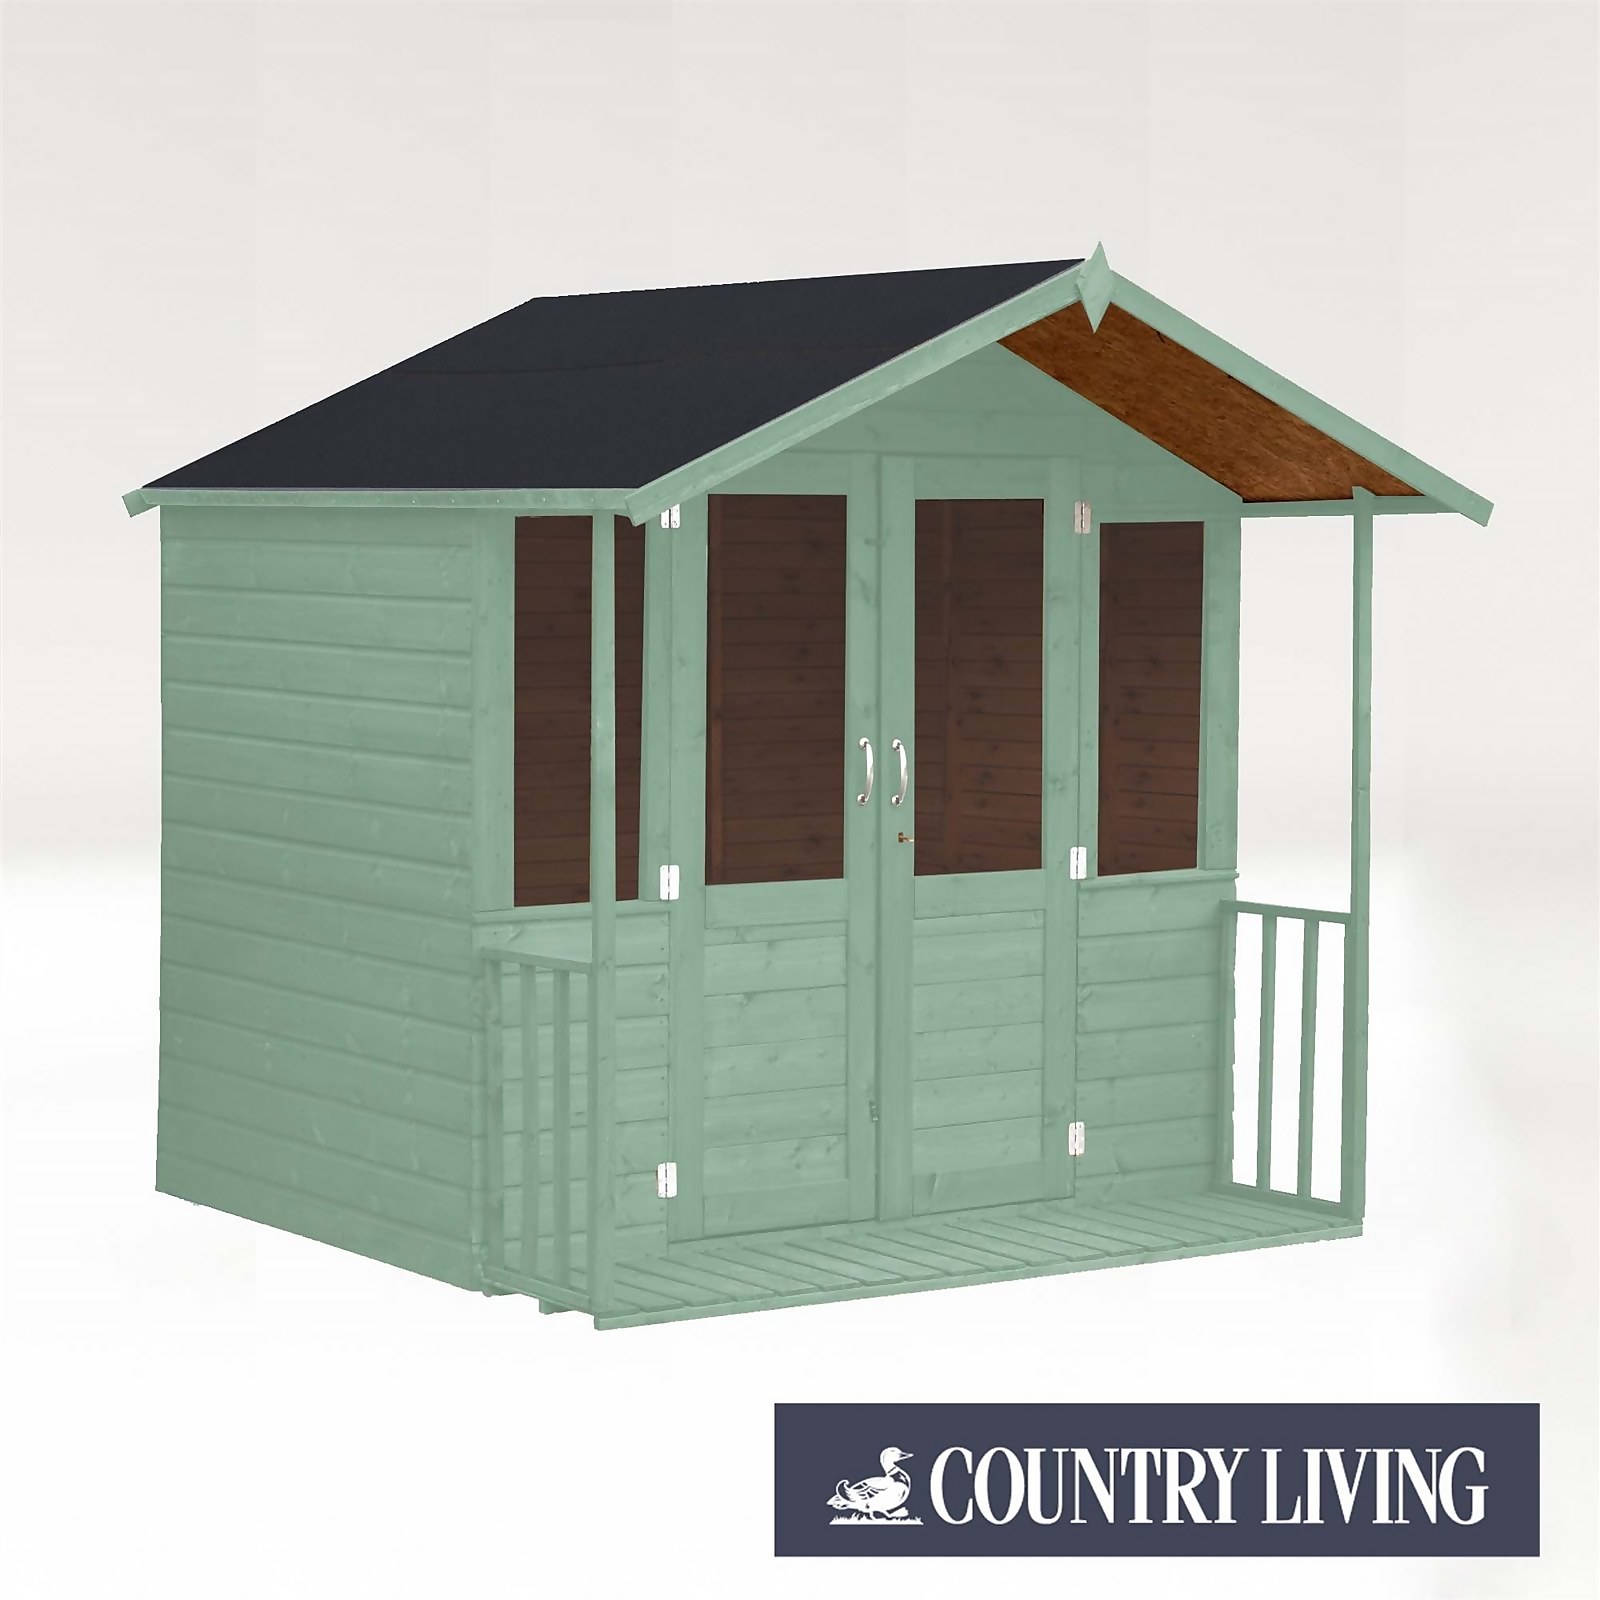 Photo of Country Living Flintham 7 X 7ft Traditional Summerhouse Painted + Installation - Aurora Green